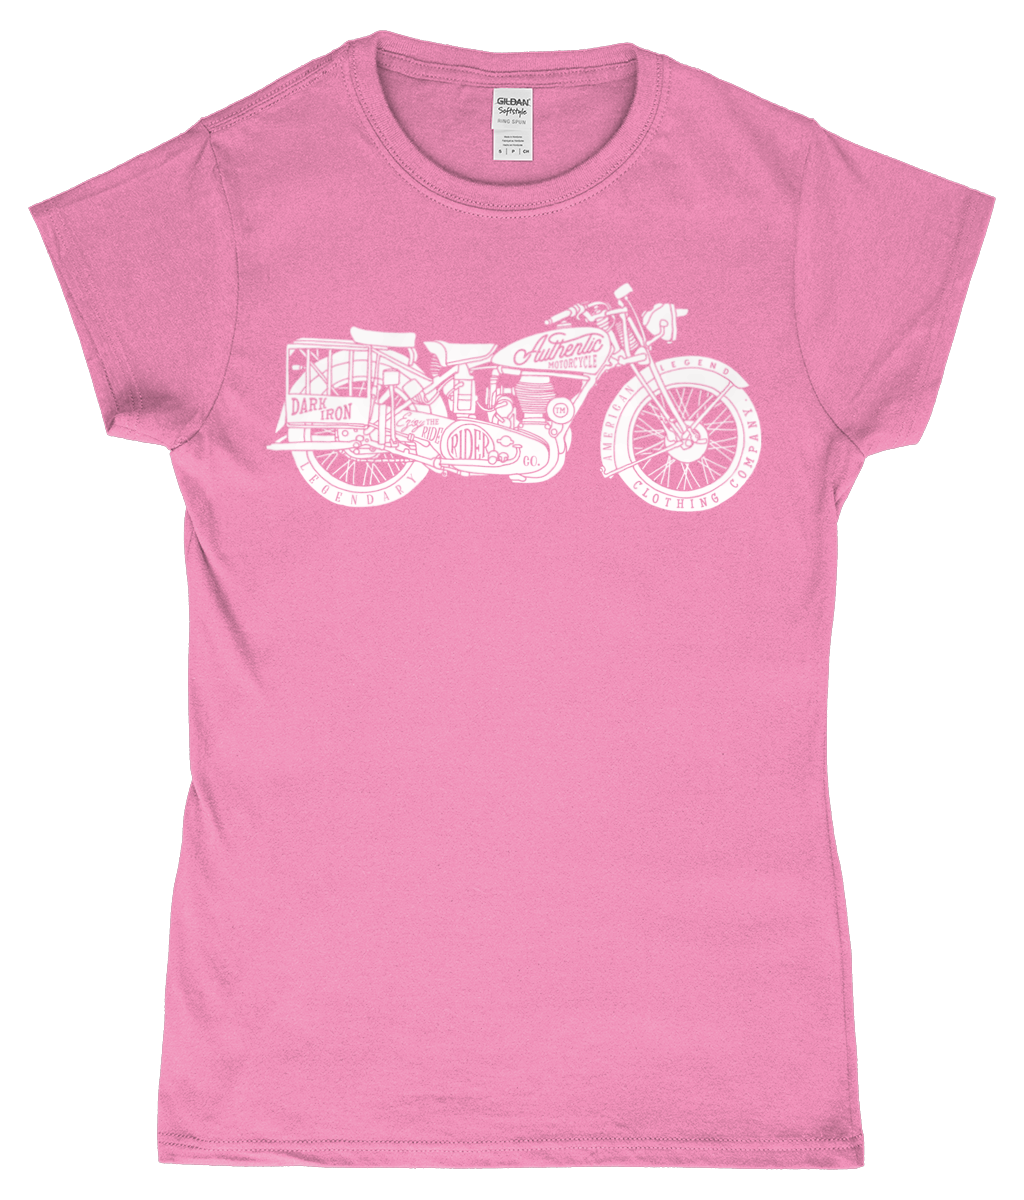 Enjoy The Ride – White – Softstyle Ladies Fitted Ringspun T-shirt